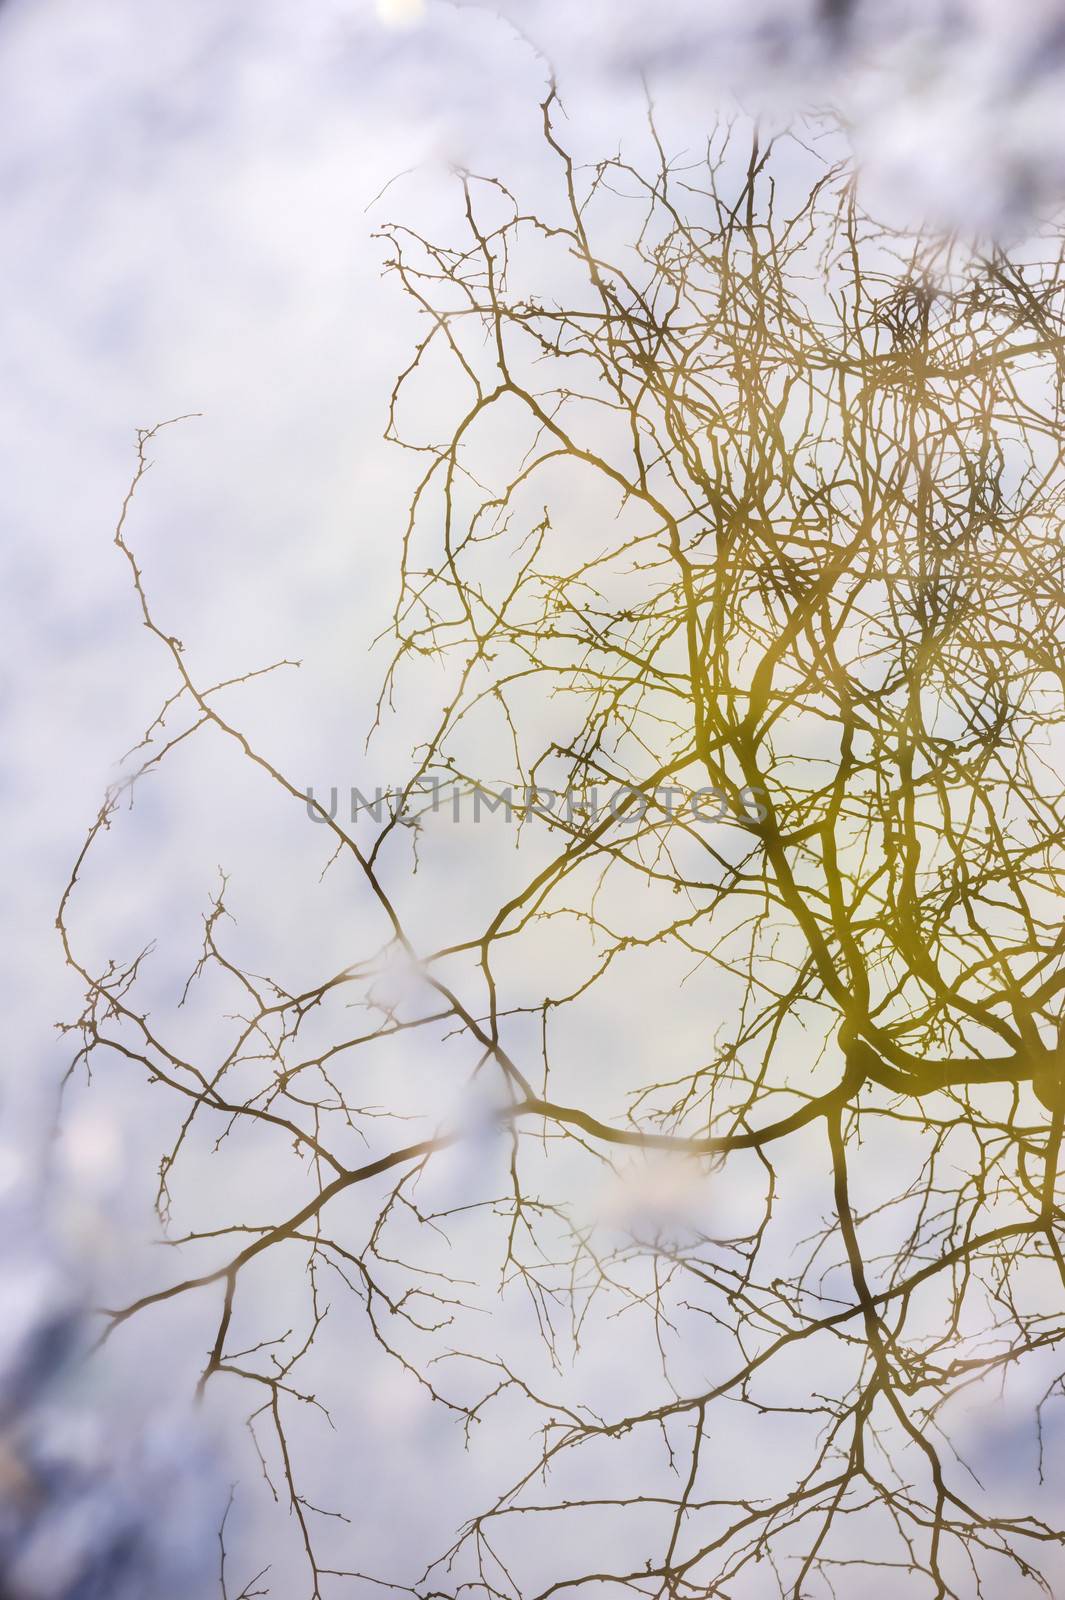 Branches reflection as symbol of depression